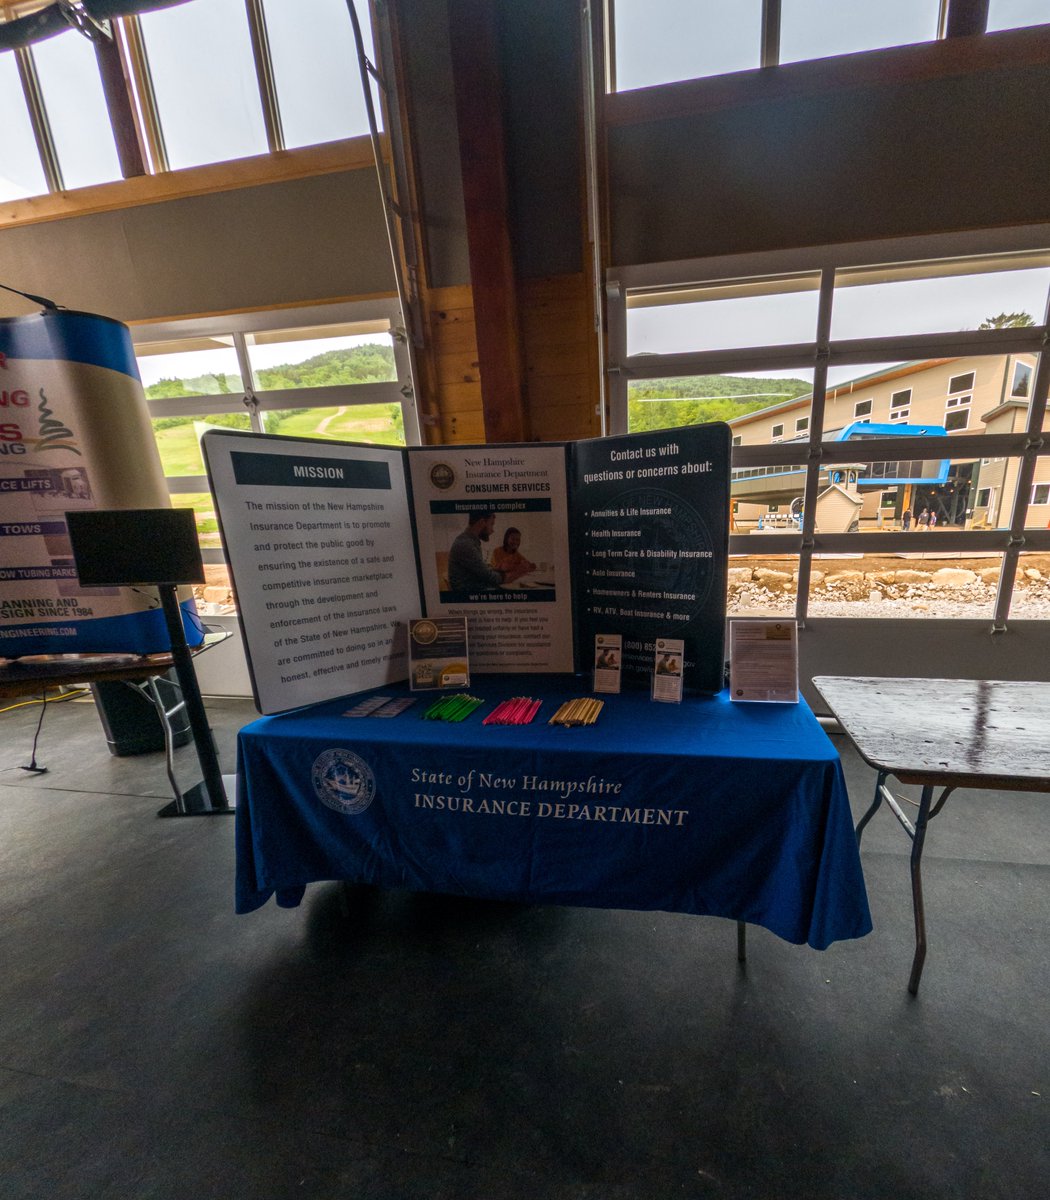 Thank you to @SkiNewHampshire for inviting us to your annual conference! We met with a lot of great people to discuss their insurance questions and concerns. If you or your business need help navigating the world of insurance, contact us for assistance! nh.gov/insurance